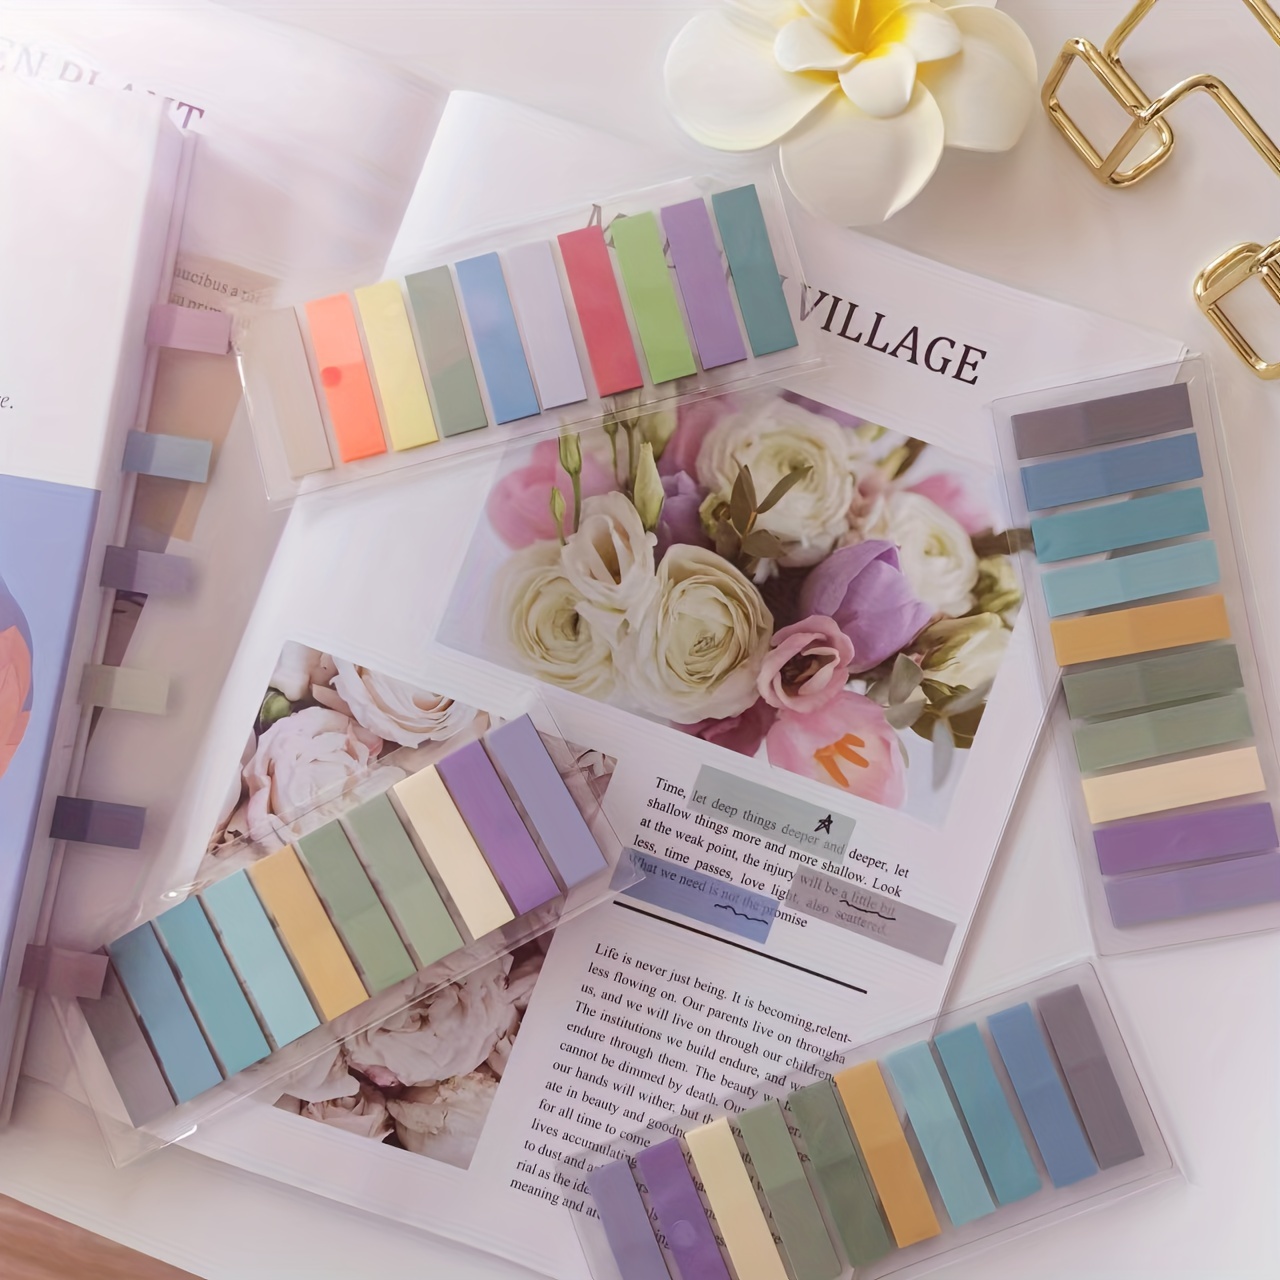 Sticky Tabs, Sticky Notes Flags Pastel Book Tabs Writable